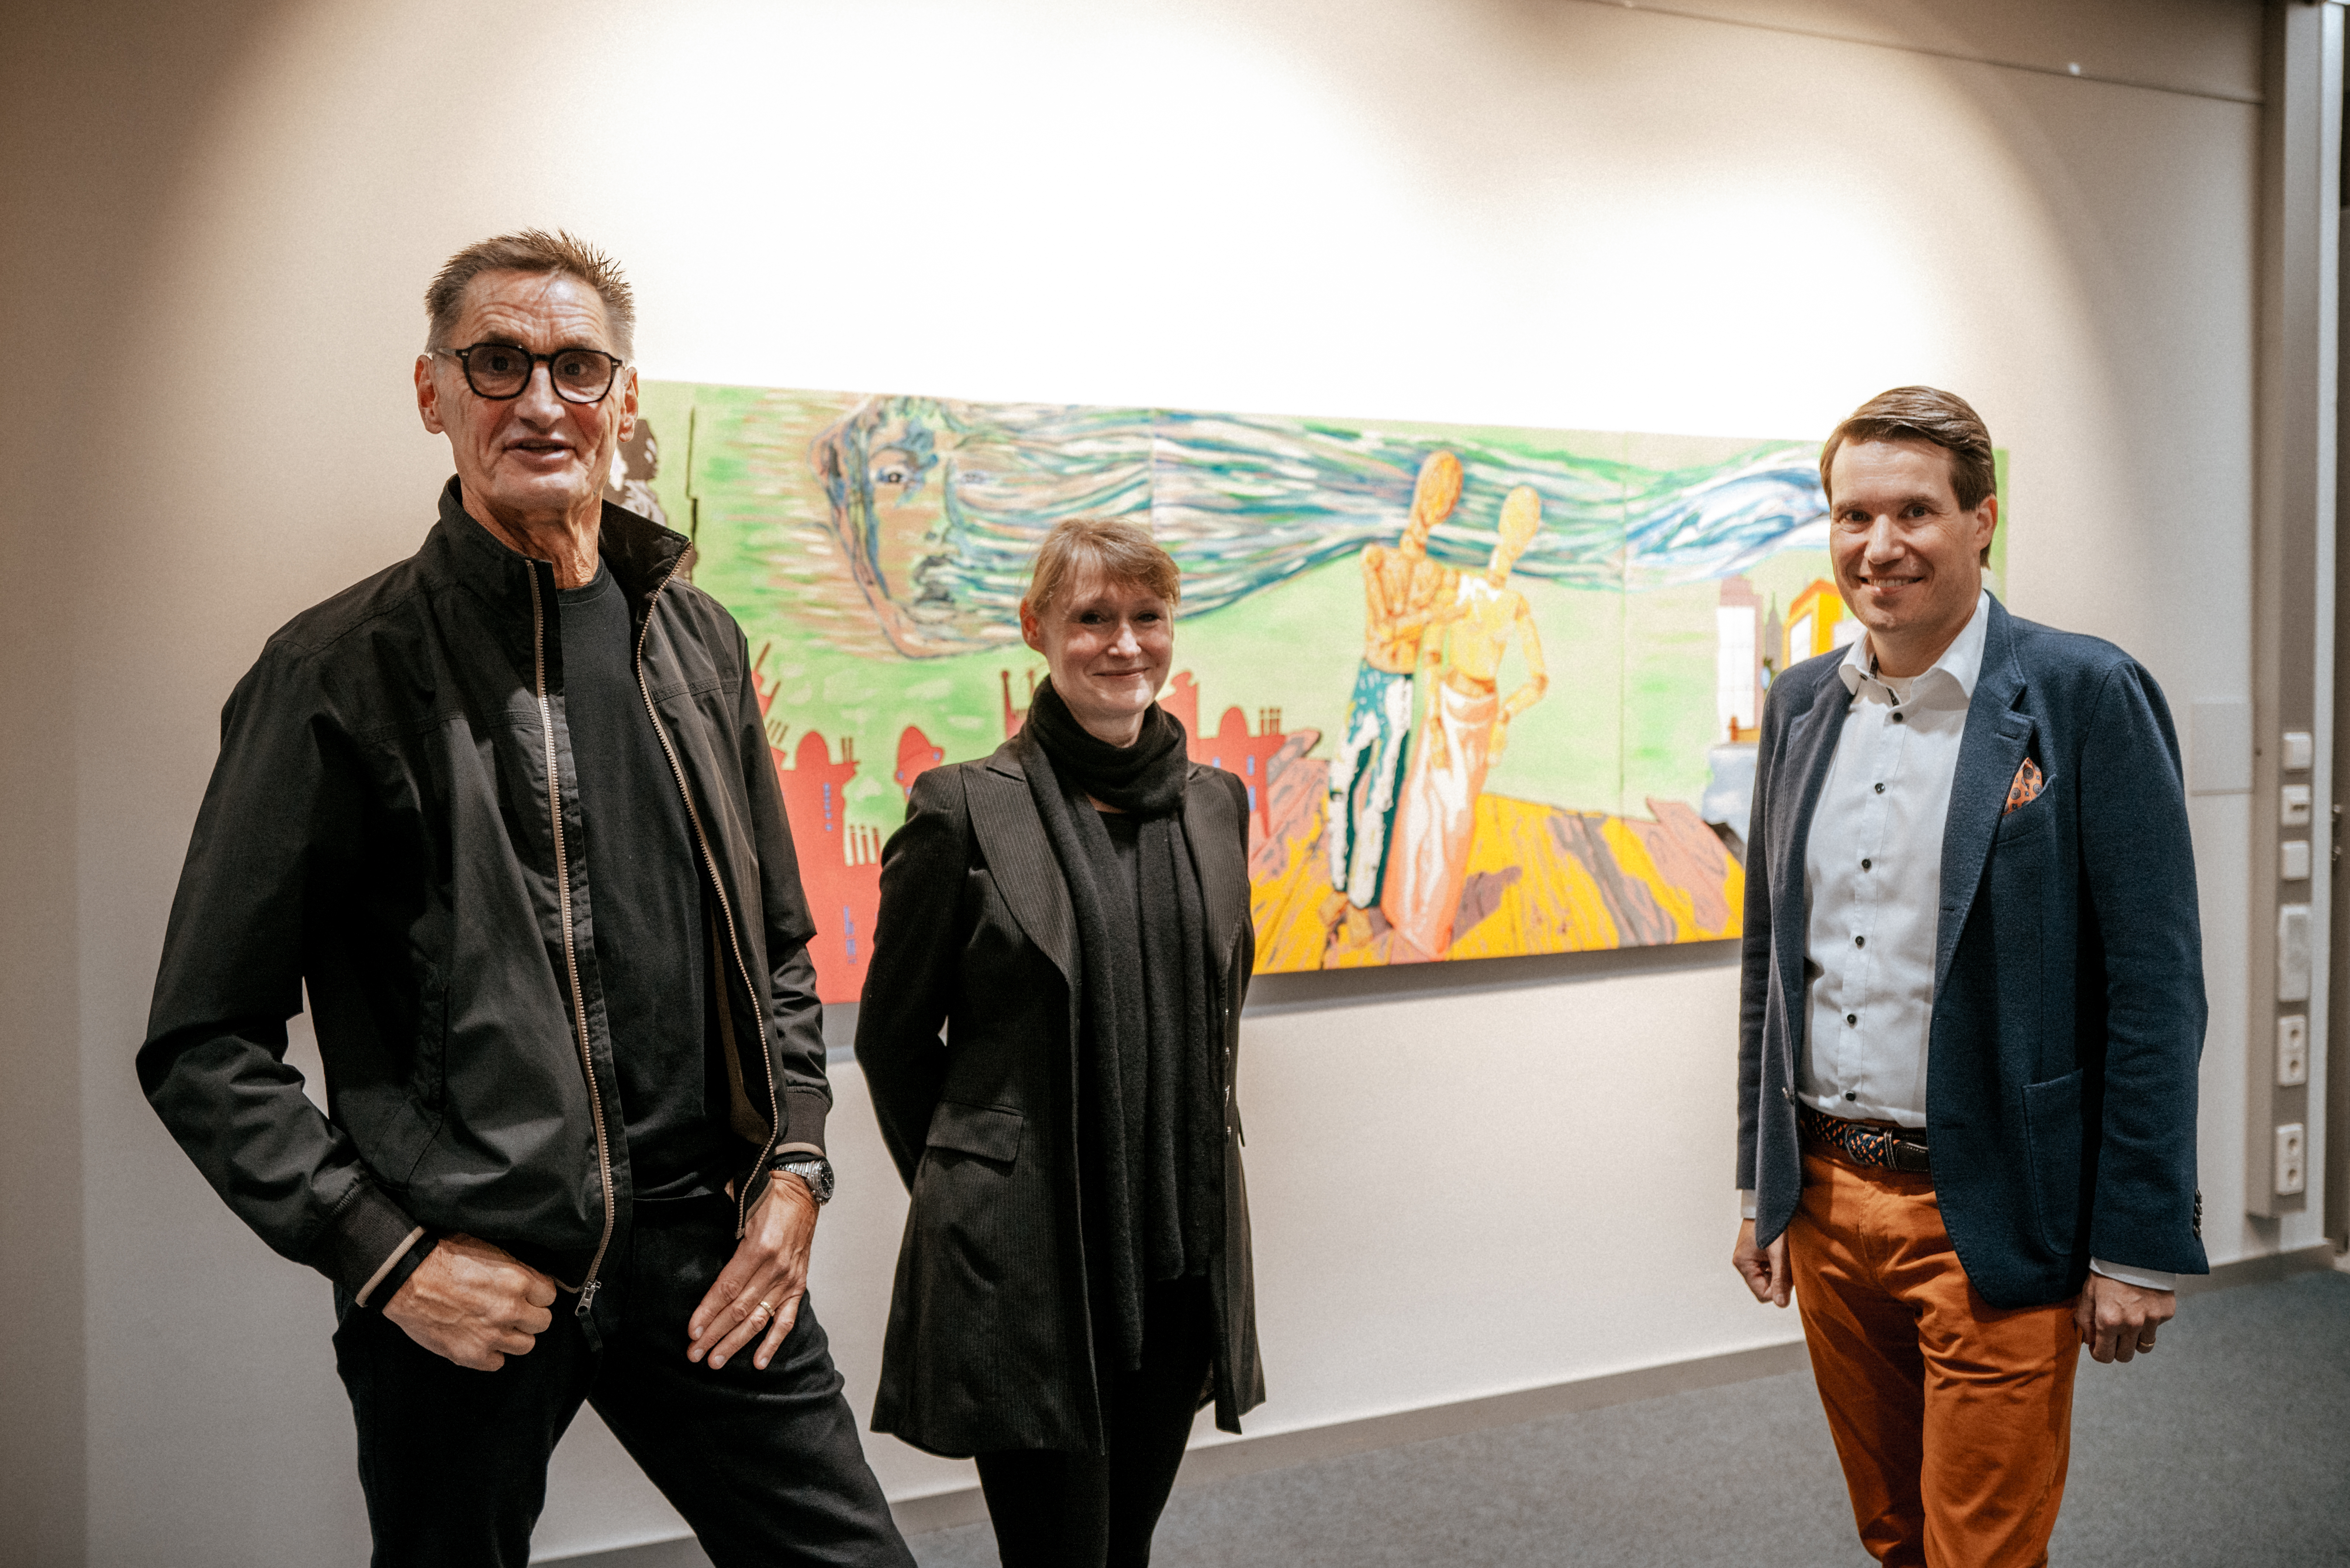 Artist Rolf Behme, Dr. Sabine Foraita from HAWK Hildesheim and Dr. Felix Büchting, spokesman of the executive board at KWS at the exhibition opening